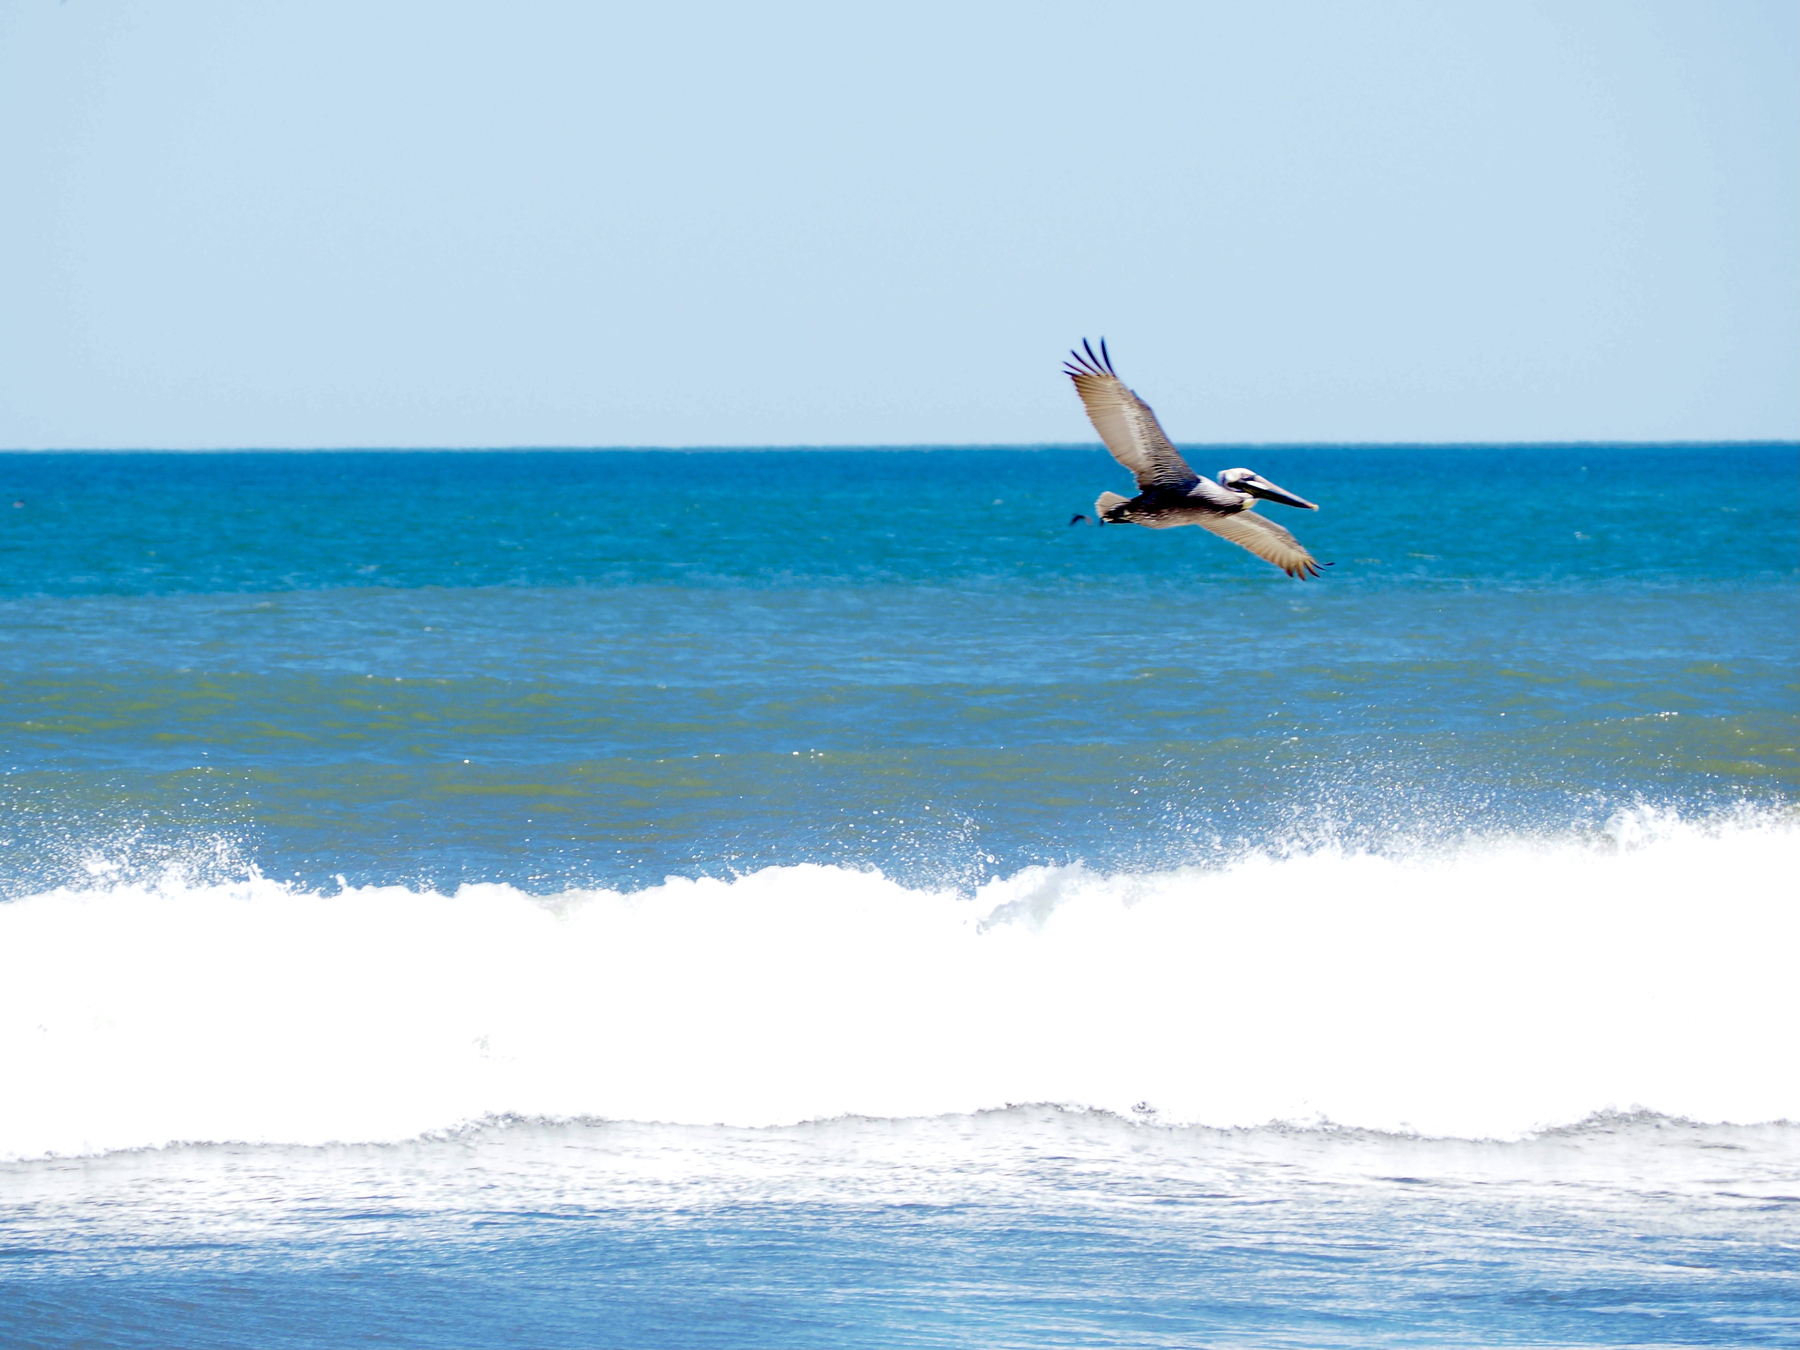 A pelican soars, wings outstretched, over a fiercely crashing wave. Brilliant white foam, deep blue sea, and sky blue horizon band the background.